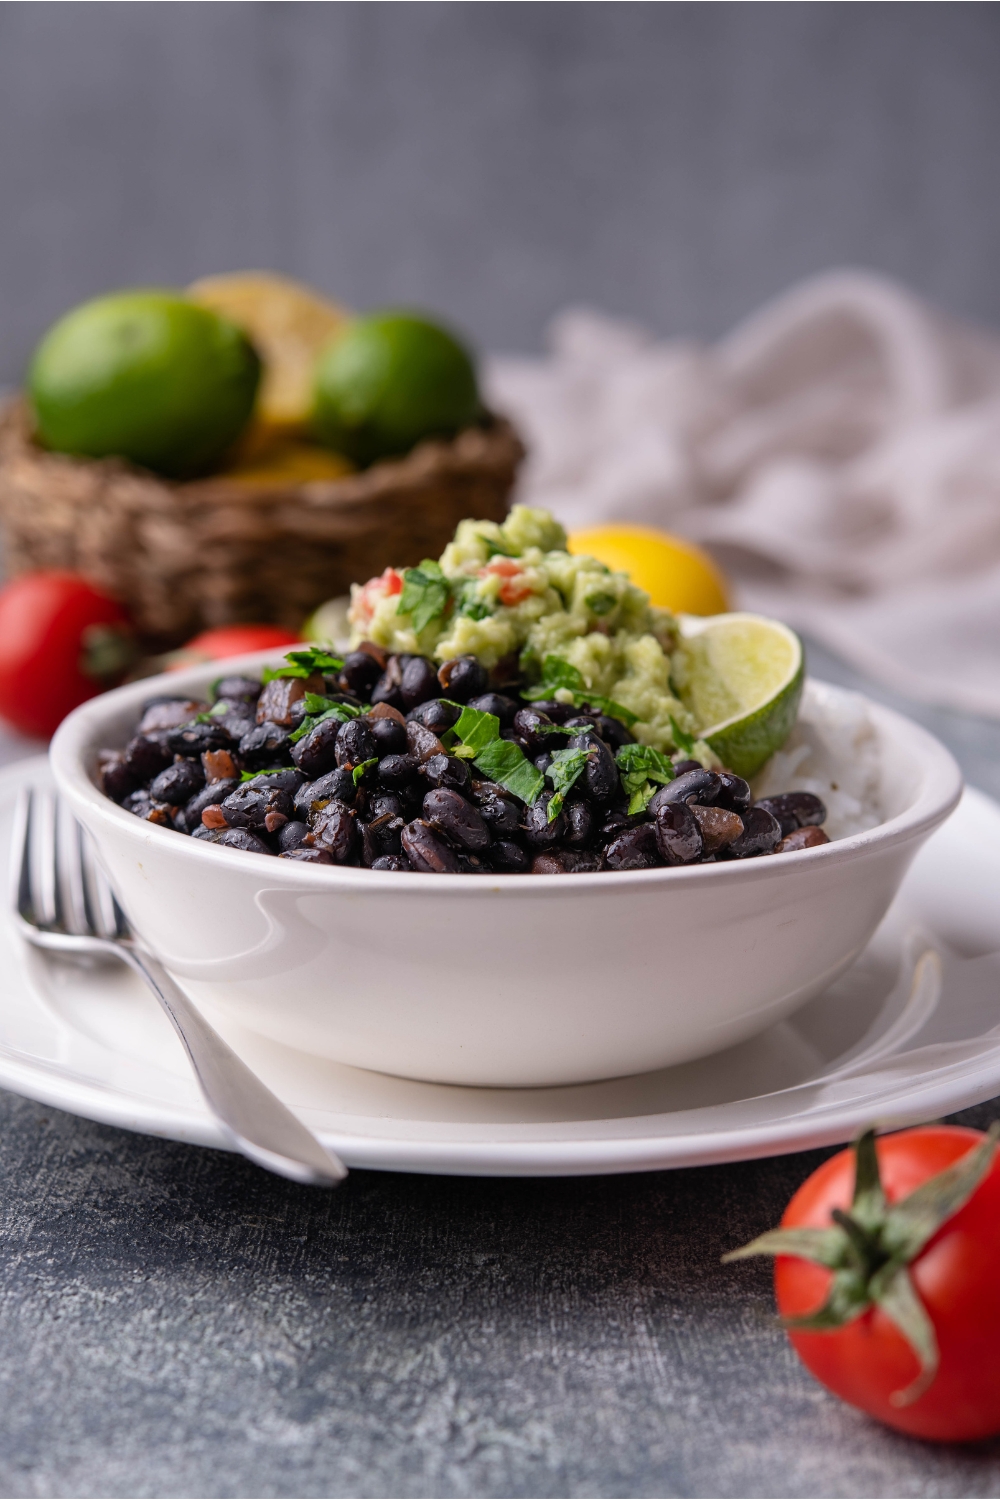 Chipotle black beans in a white bowl layered on a white plate, served with white rice, guacamole, a lime wedge, and fresh herbs. A fork is on the plate and a bowl of limes and lemons is in the background.